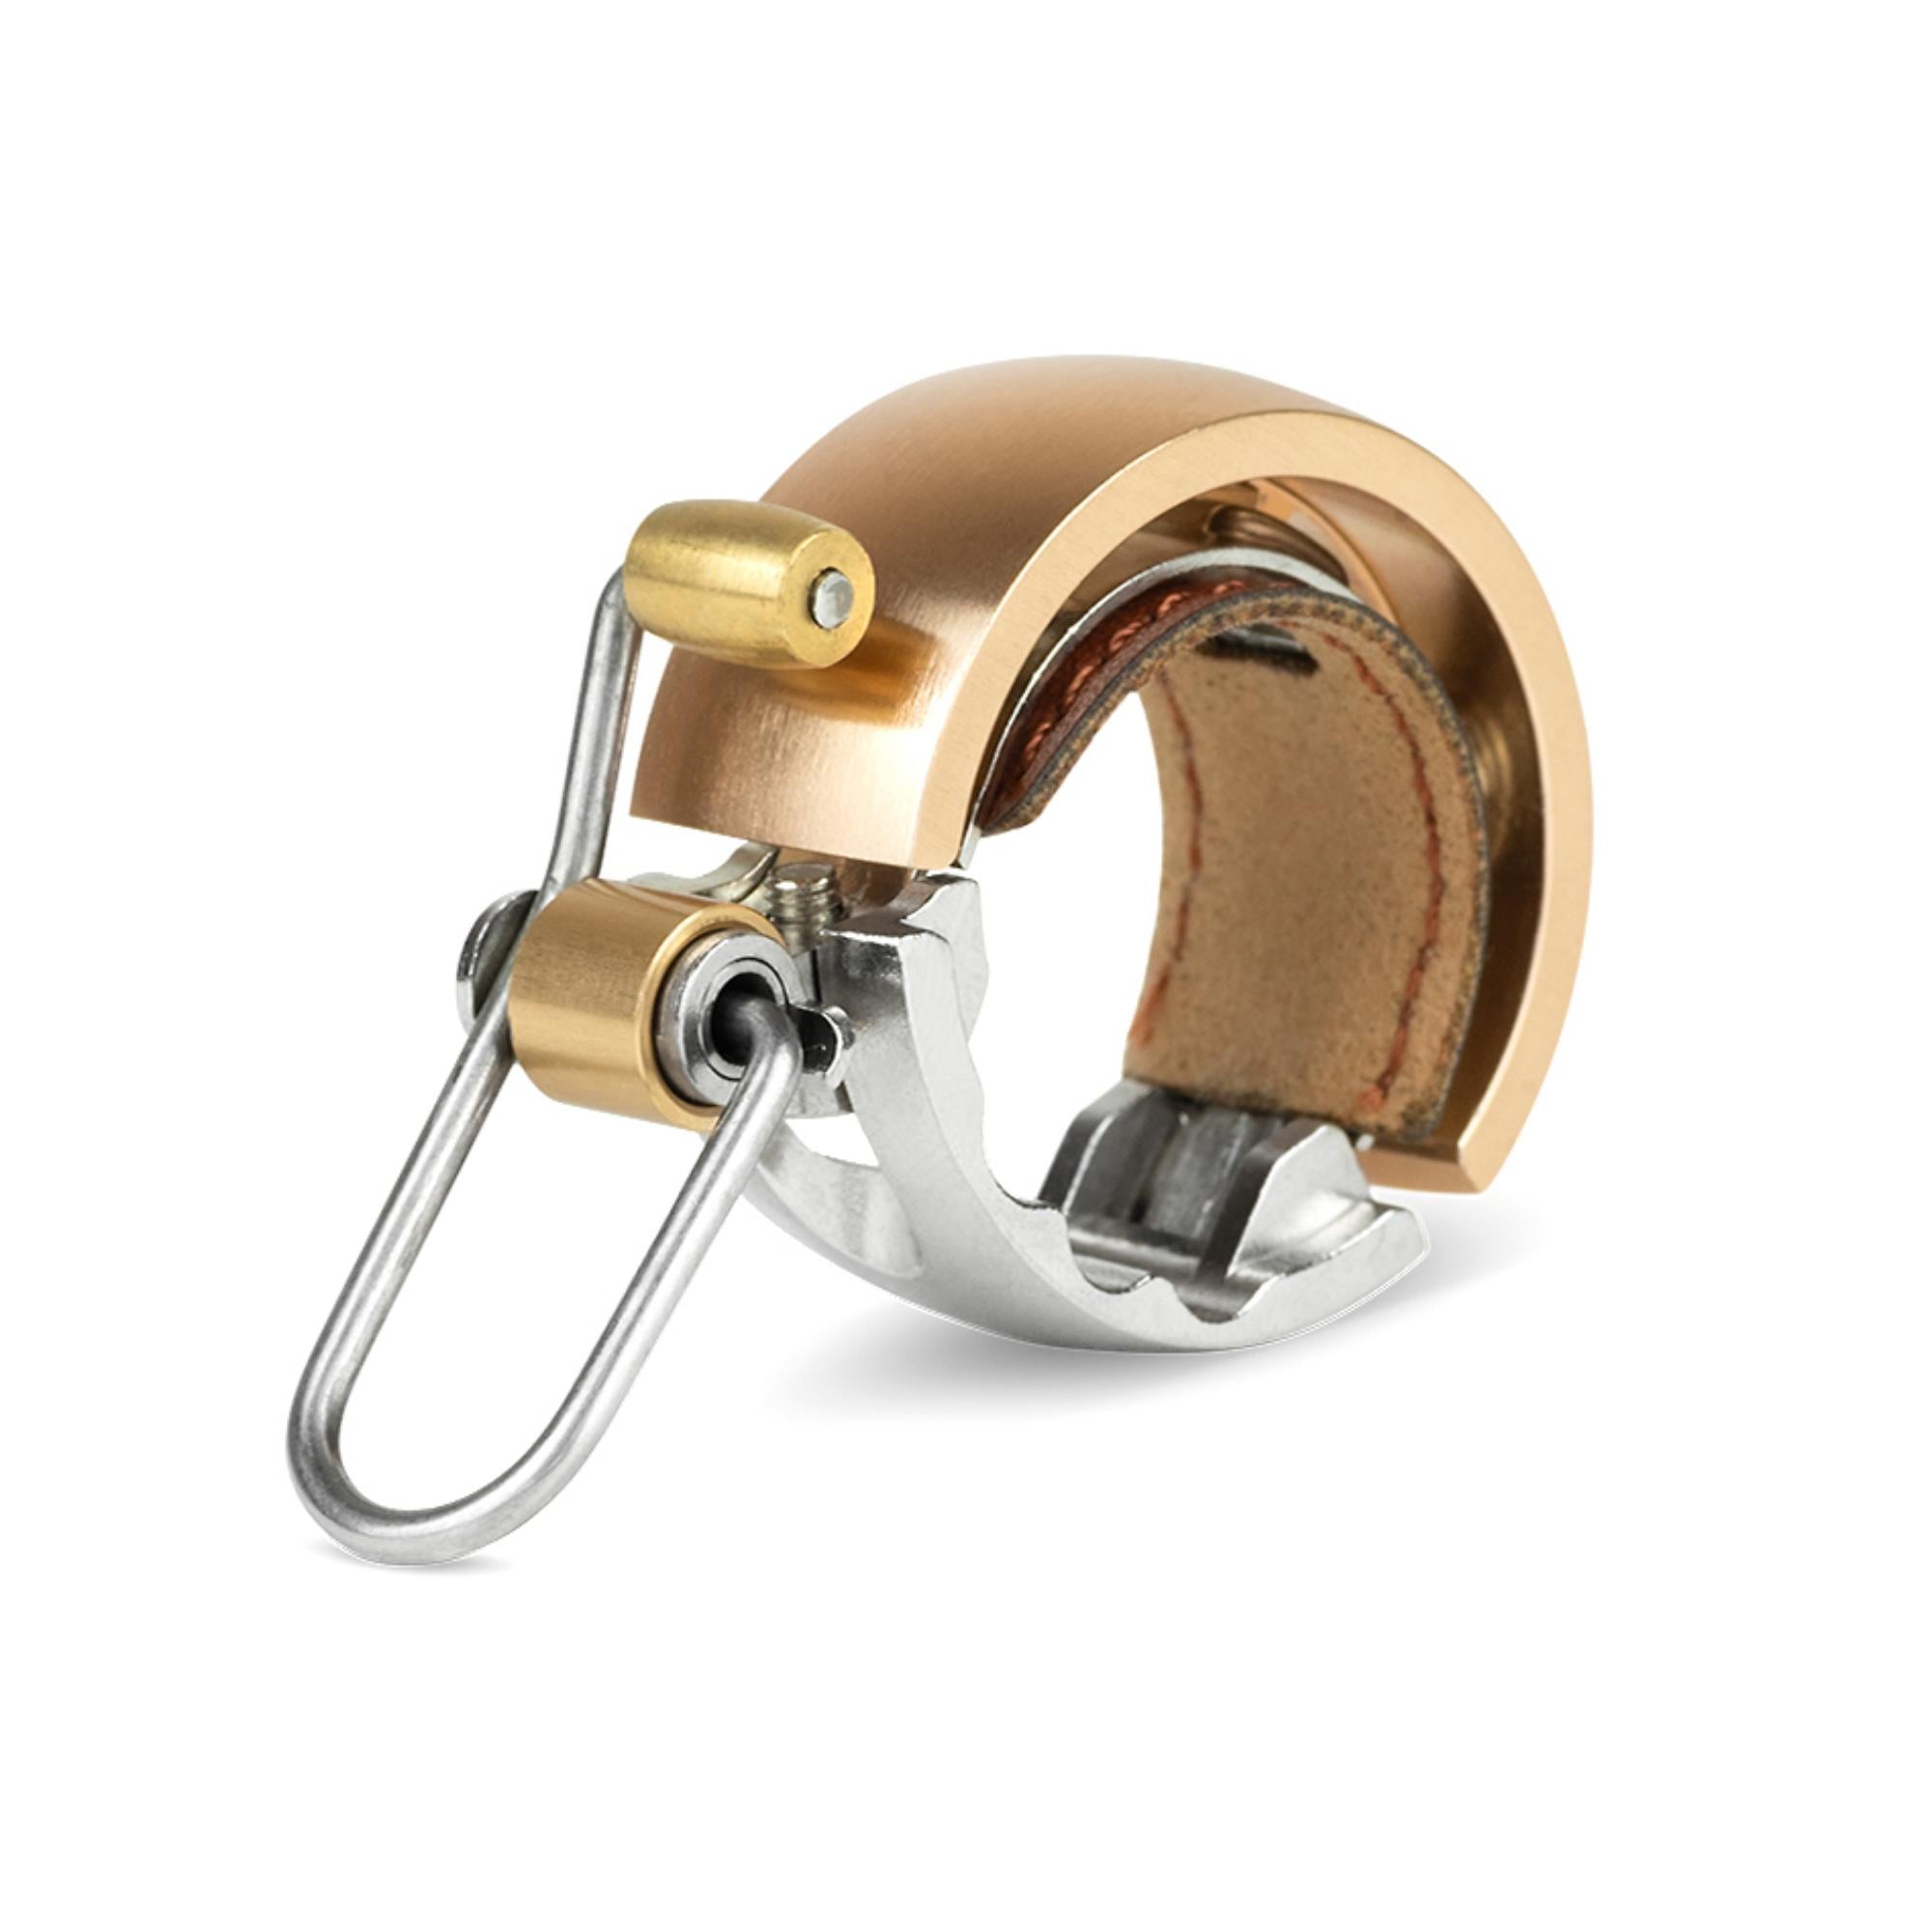 Knog oi Luxe bell in brass